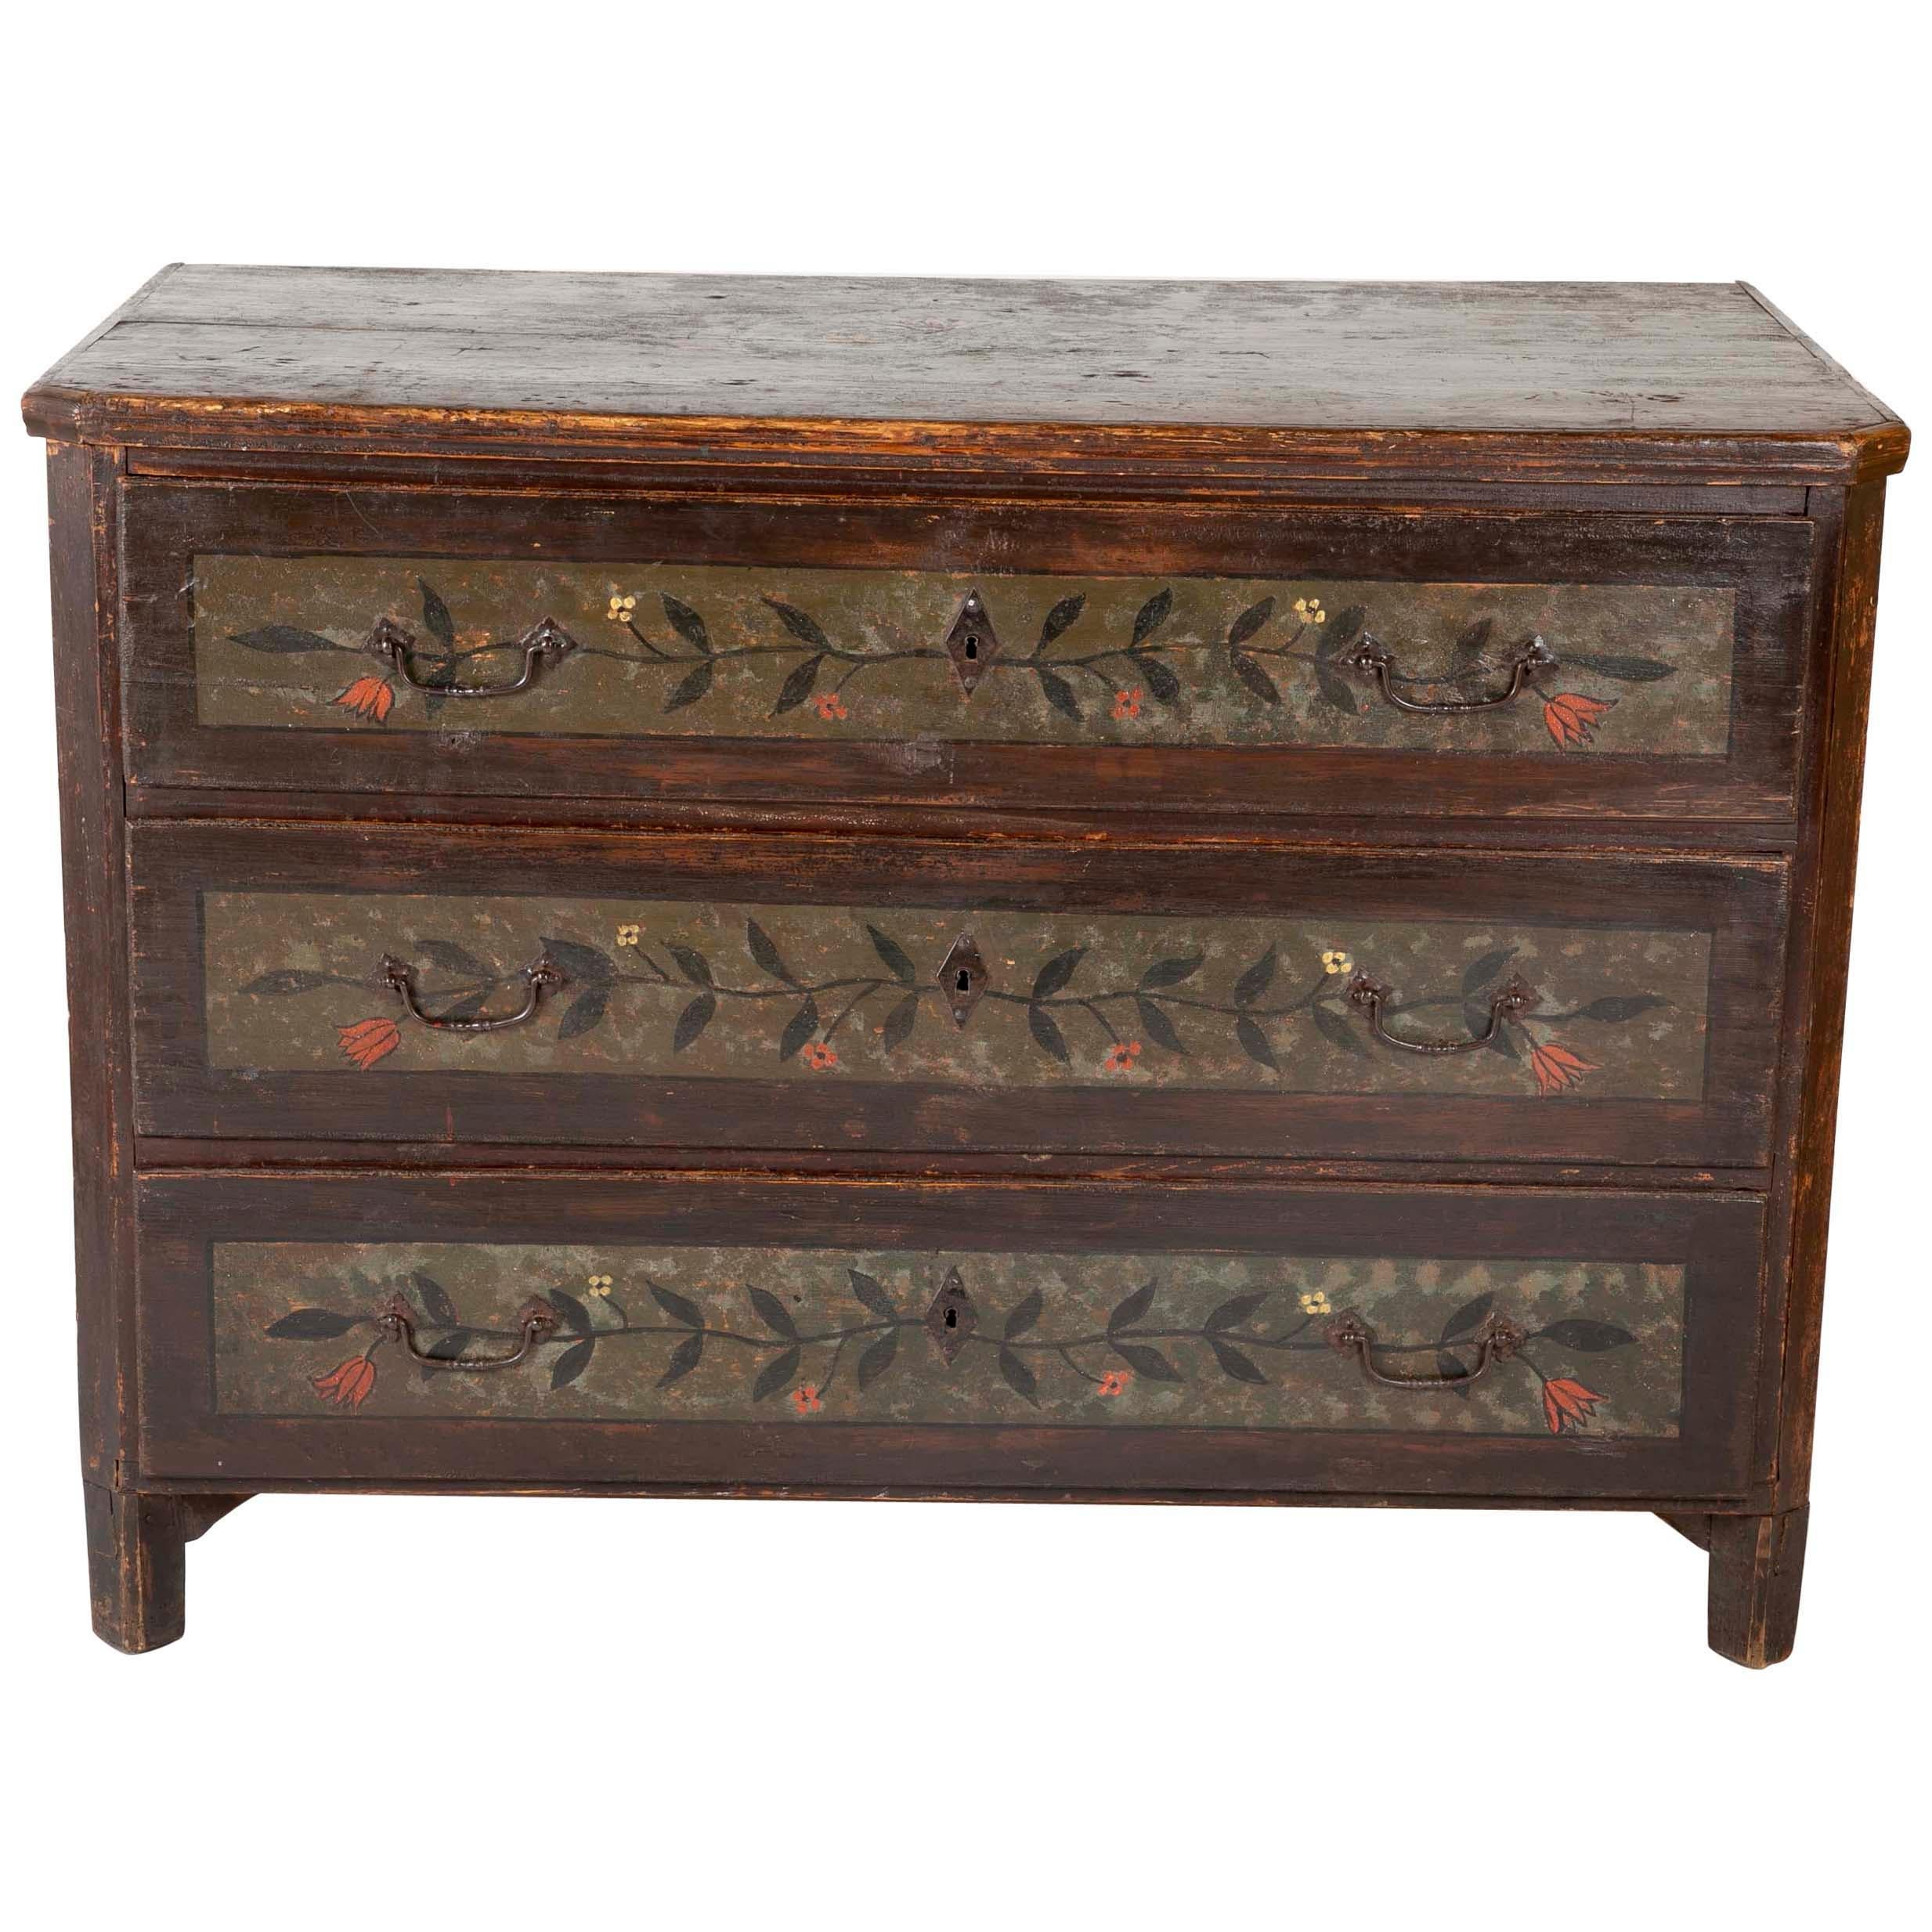 Continental Pine Chest with Poly-Chrome Decoration